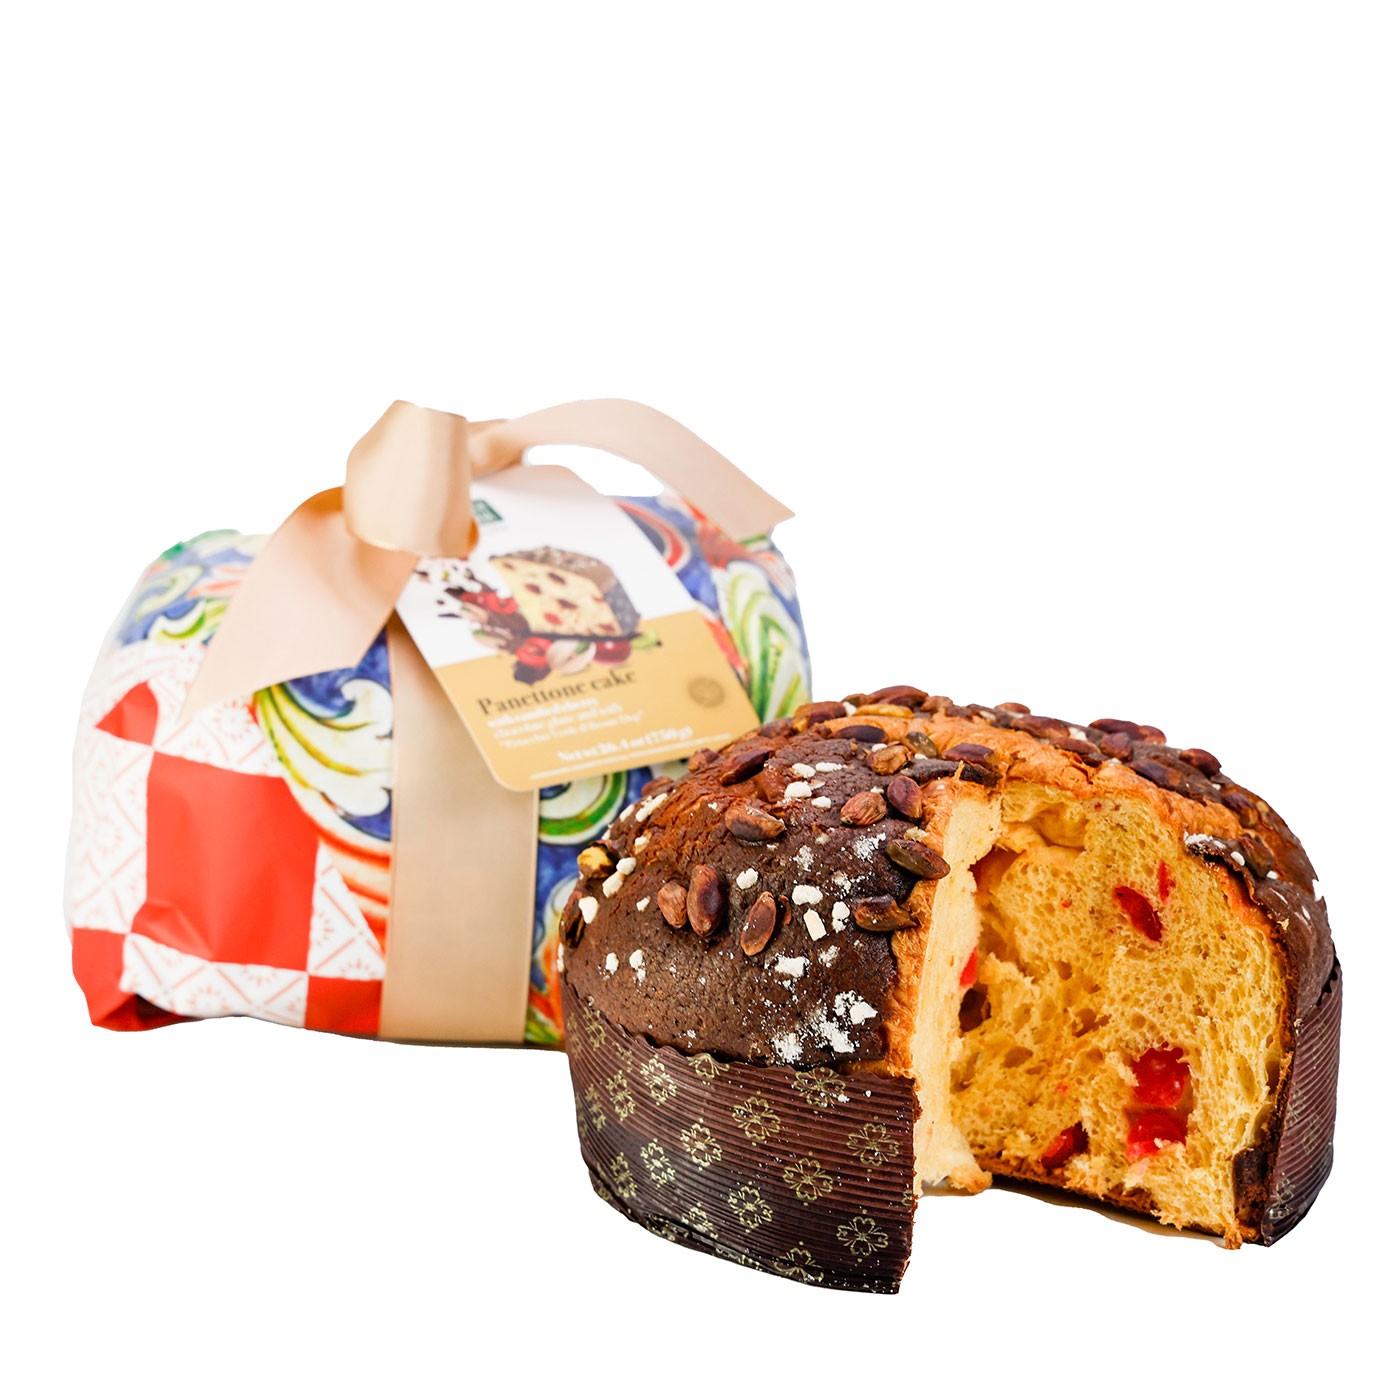 Pistachio and Cherry Chocolate Covered Panettone 17.6 oz